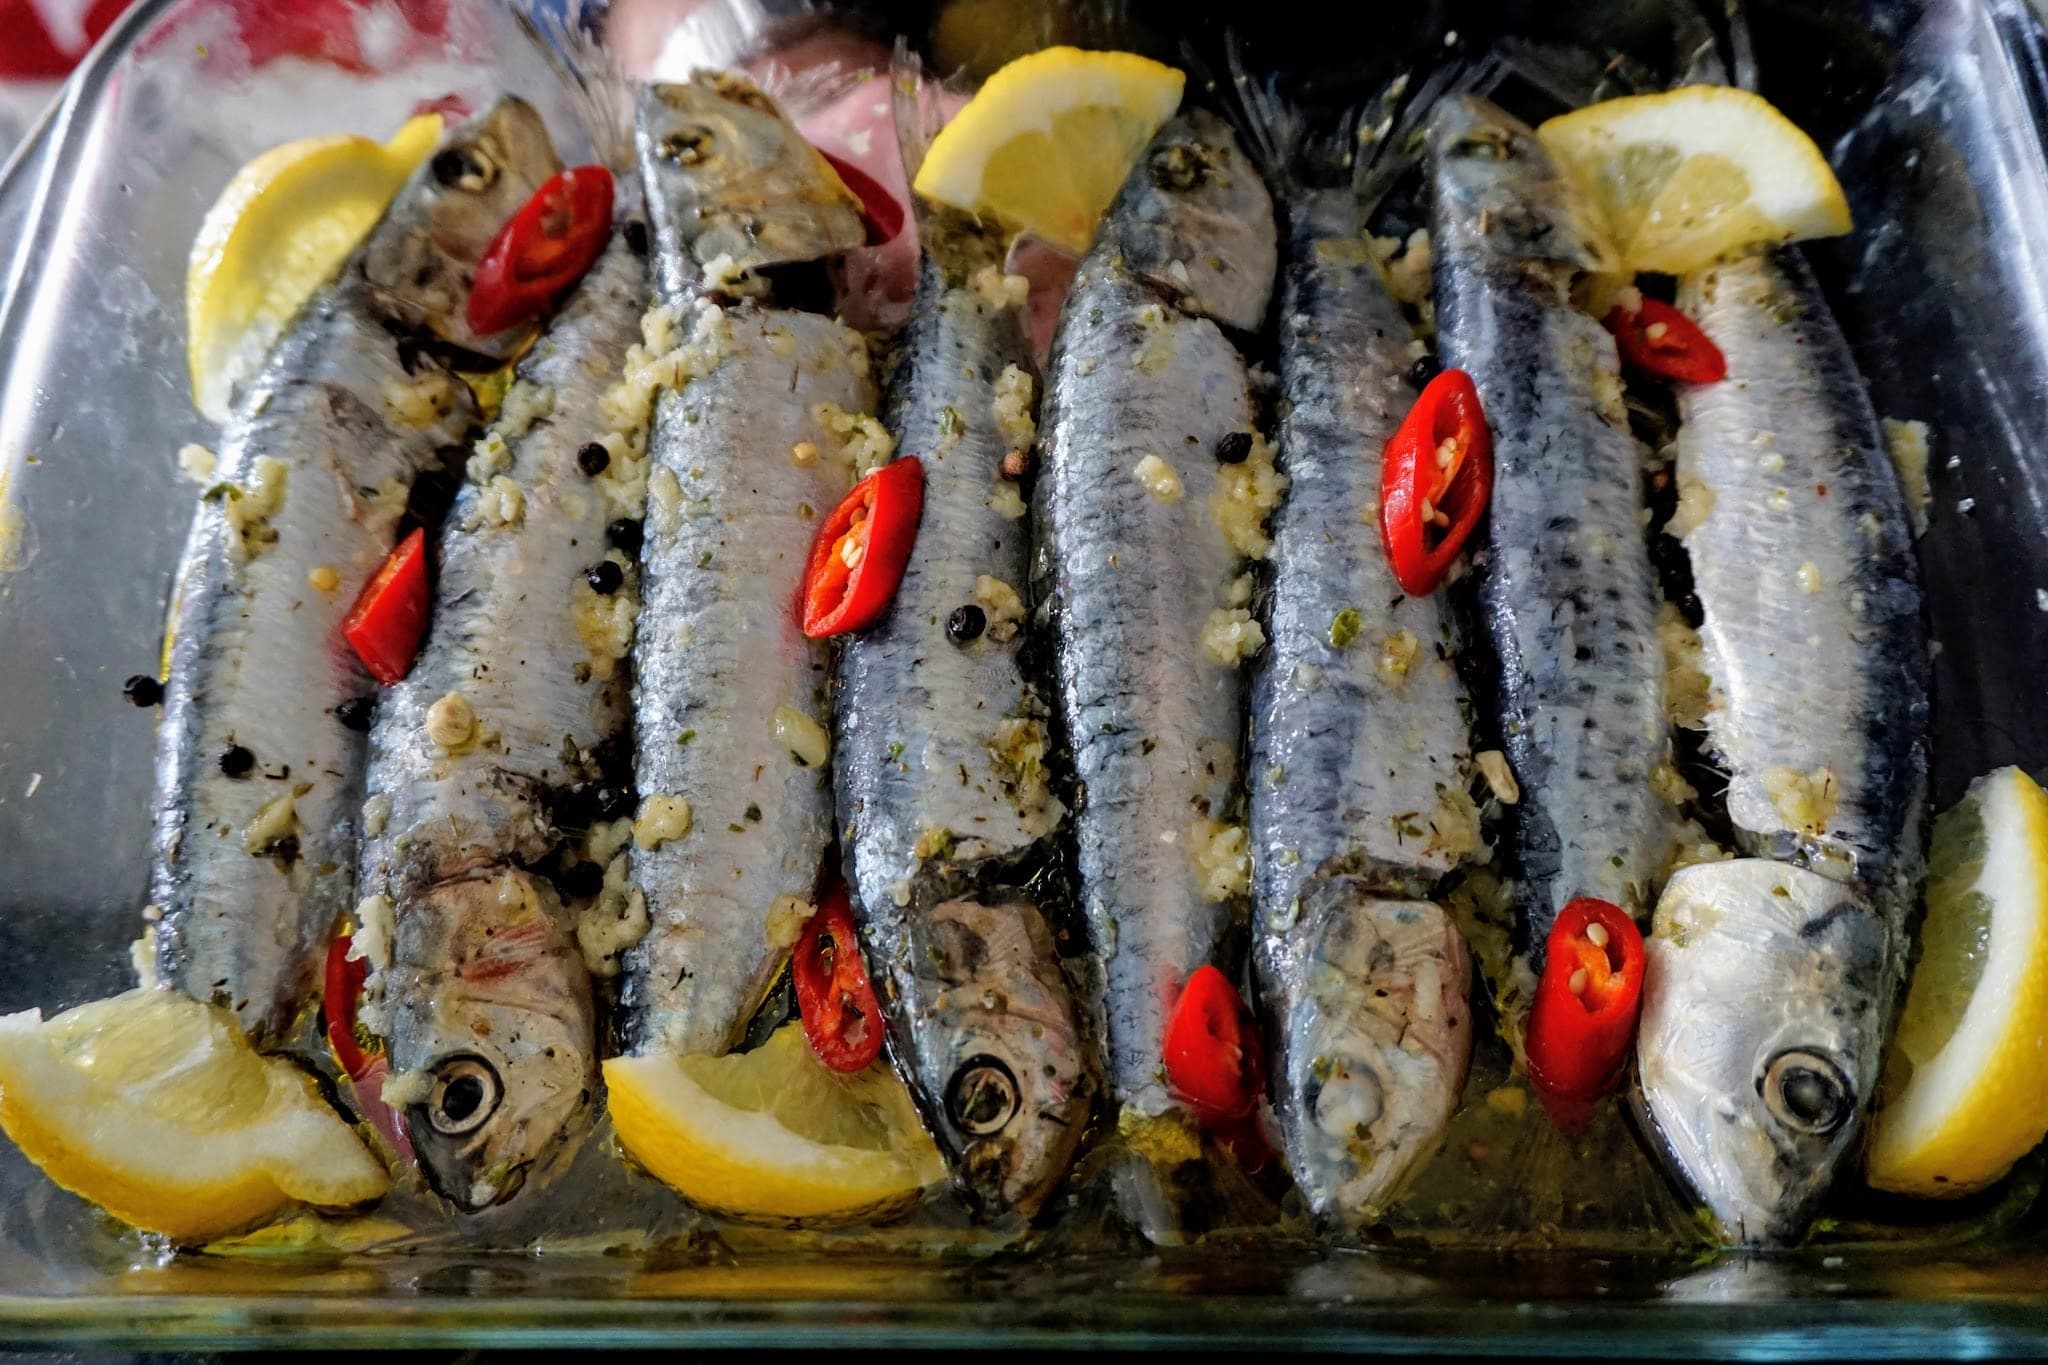 Sardines seasoned with ingredients laying down on a baking glass dish